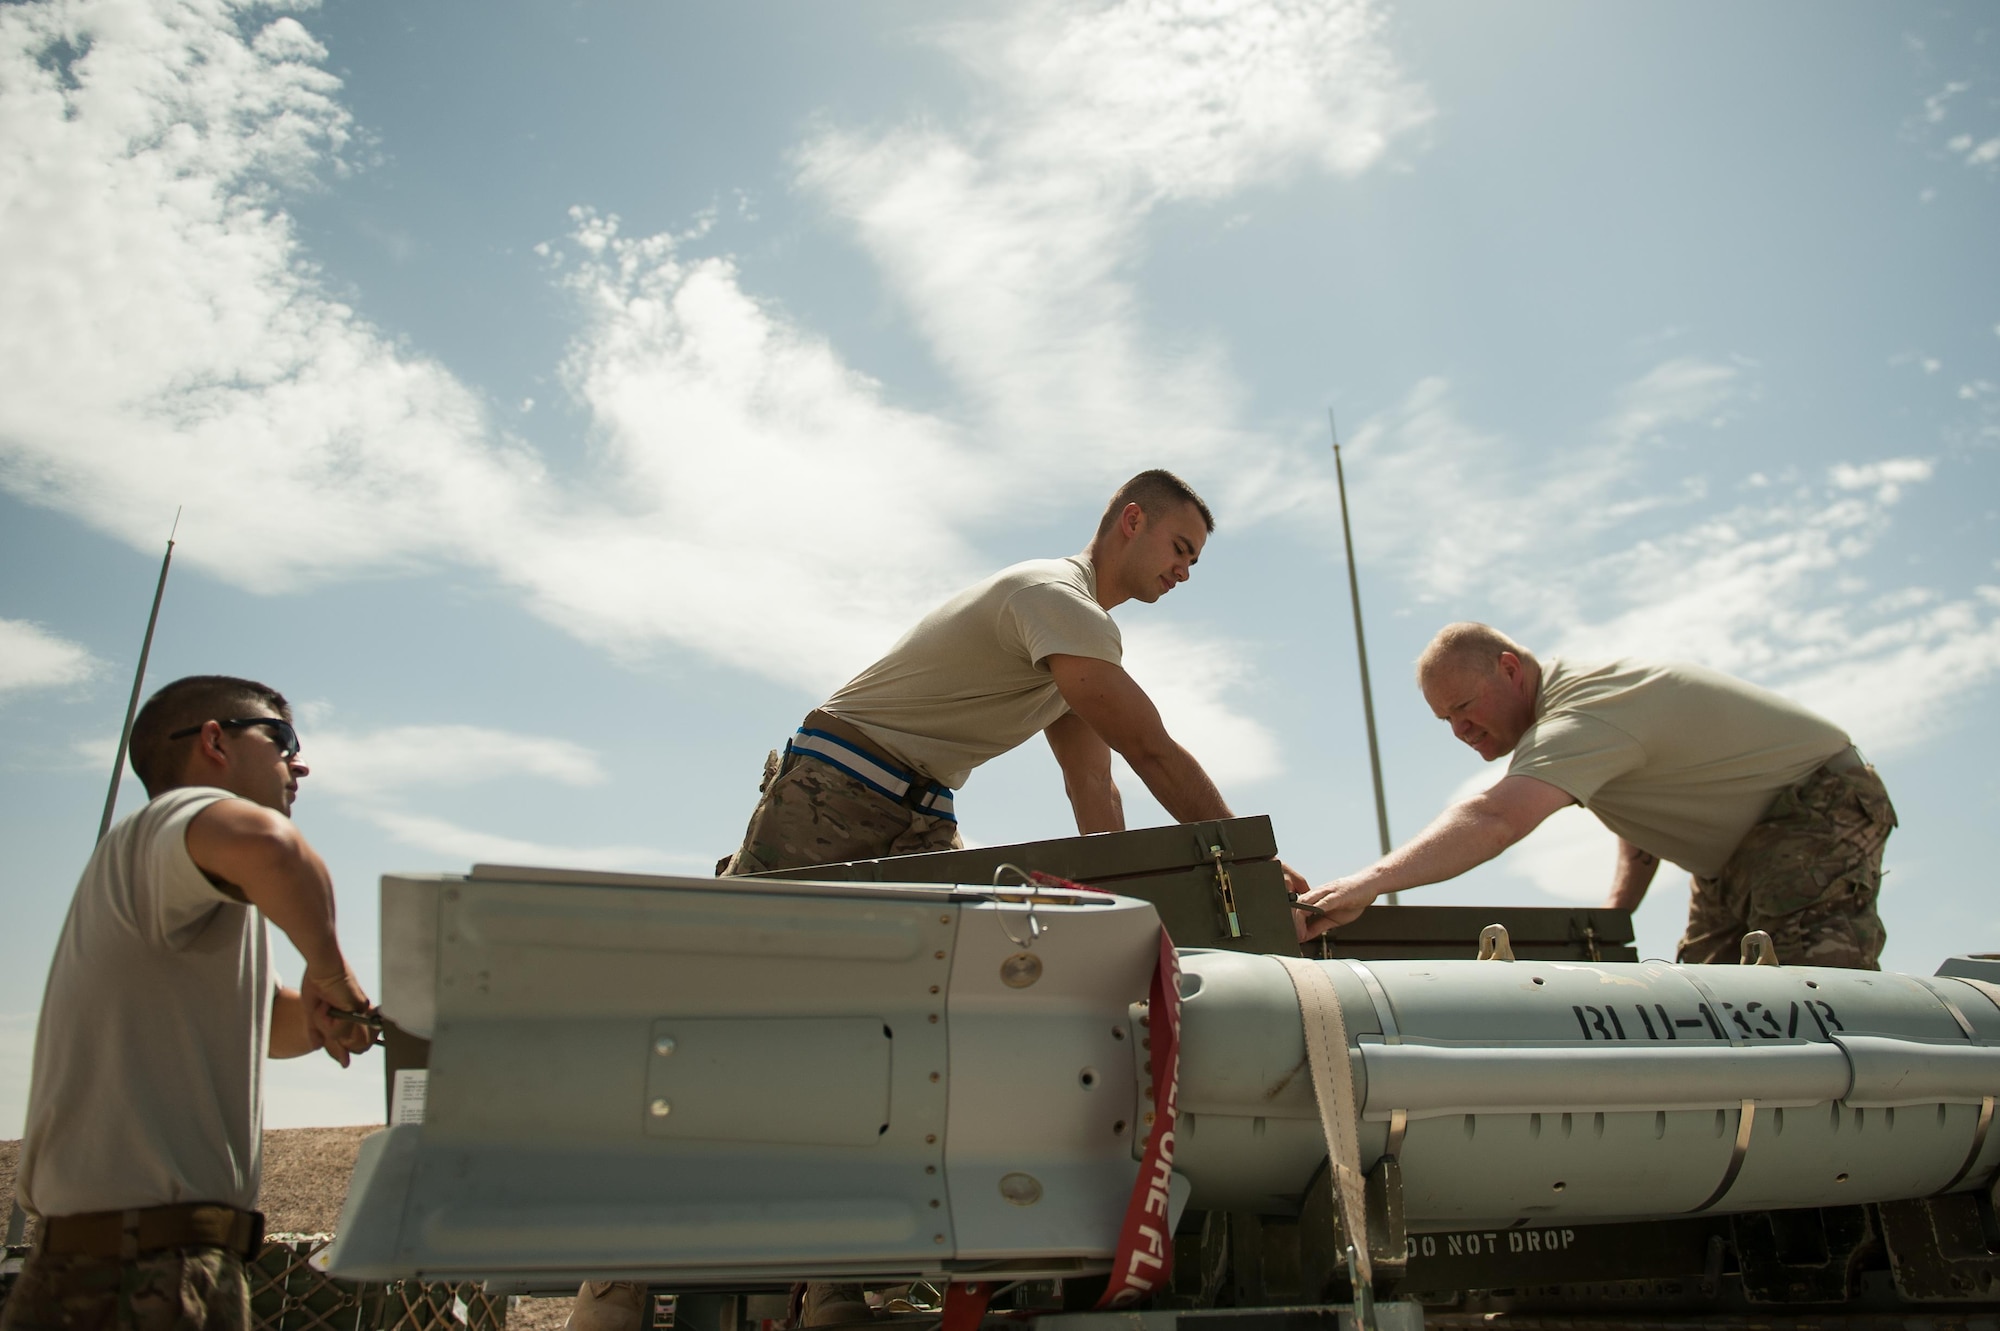 U.S. Air Force Airman 1st Class Matthew Lopez, center, 62nd Expeditionary Reconnaissance Squadron munitions systems technician, unpacks a GPS-guided GBU-49 weapon at Kandahar Airfield, Afghanistan, Aug. 15, 2015.  The 62nd ERS Munitions Flight ensures that every munition loaded onto an MQ-1 Predator and MQ-9 Reaper will perform as expected when used. (U.S. Air Force photo by Tech. Sgt. Joseph Swafford/Released)